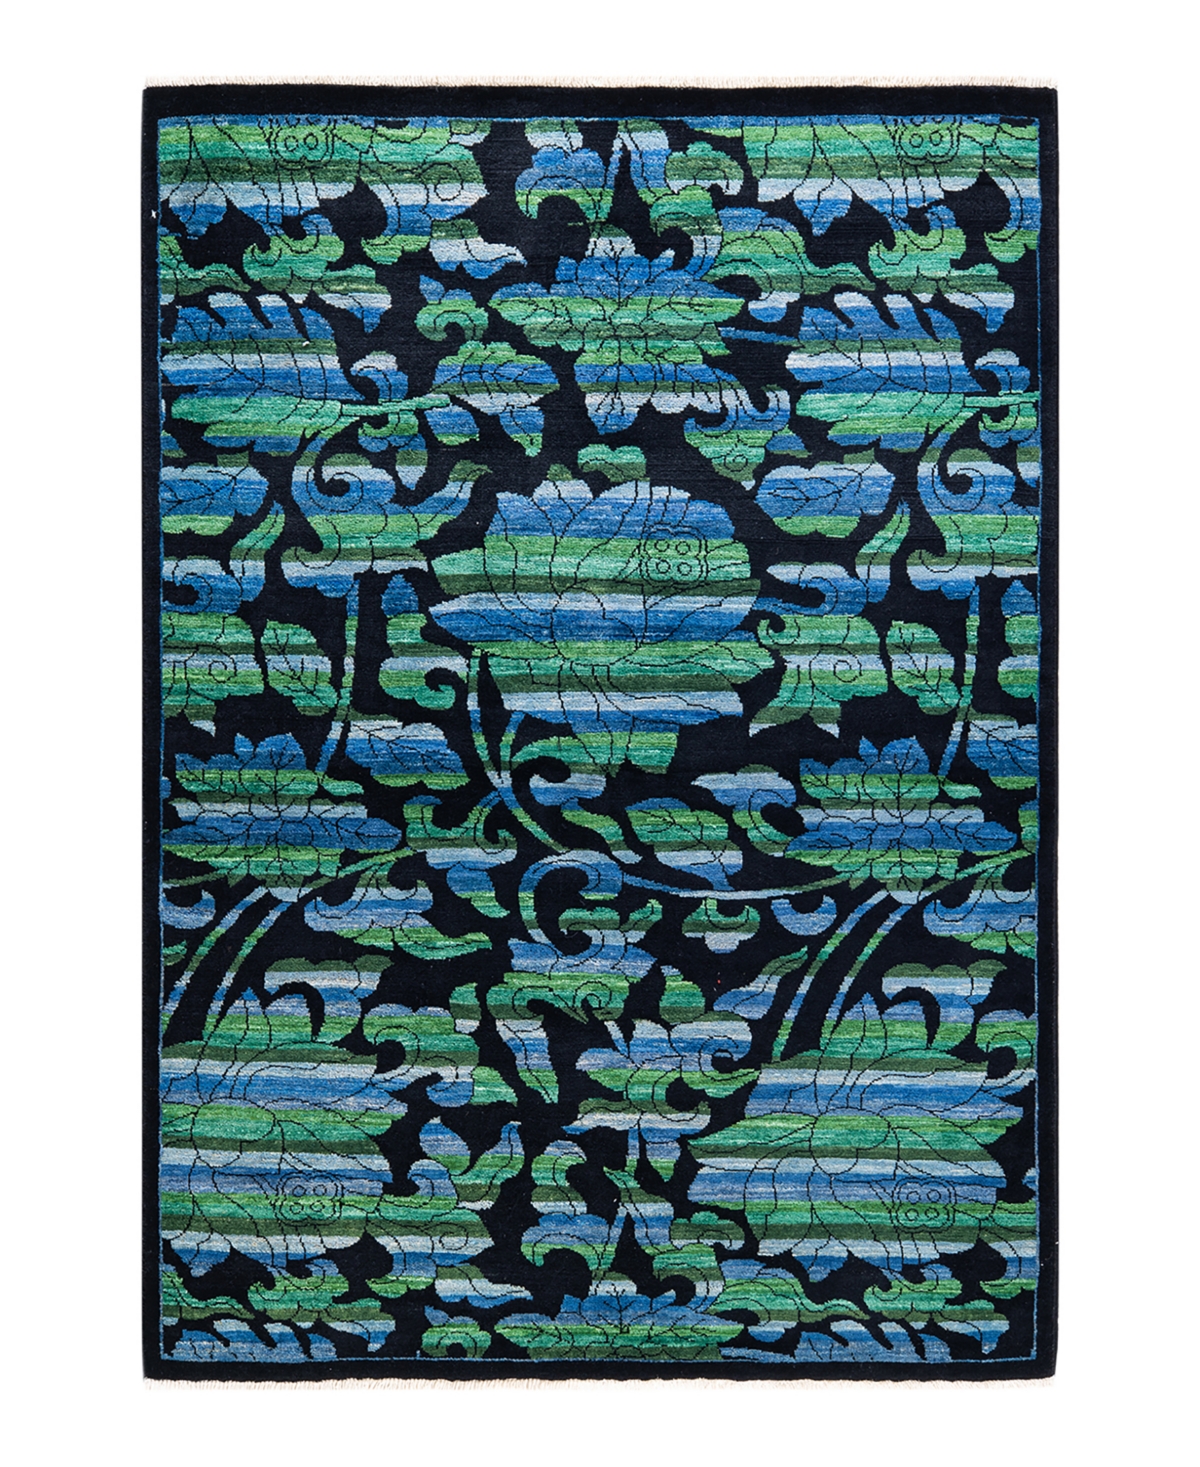 Adorn Hand Woven Rugs Arts Crafts M175974 4'2in x 6' Area Rug - Black